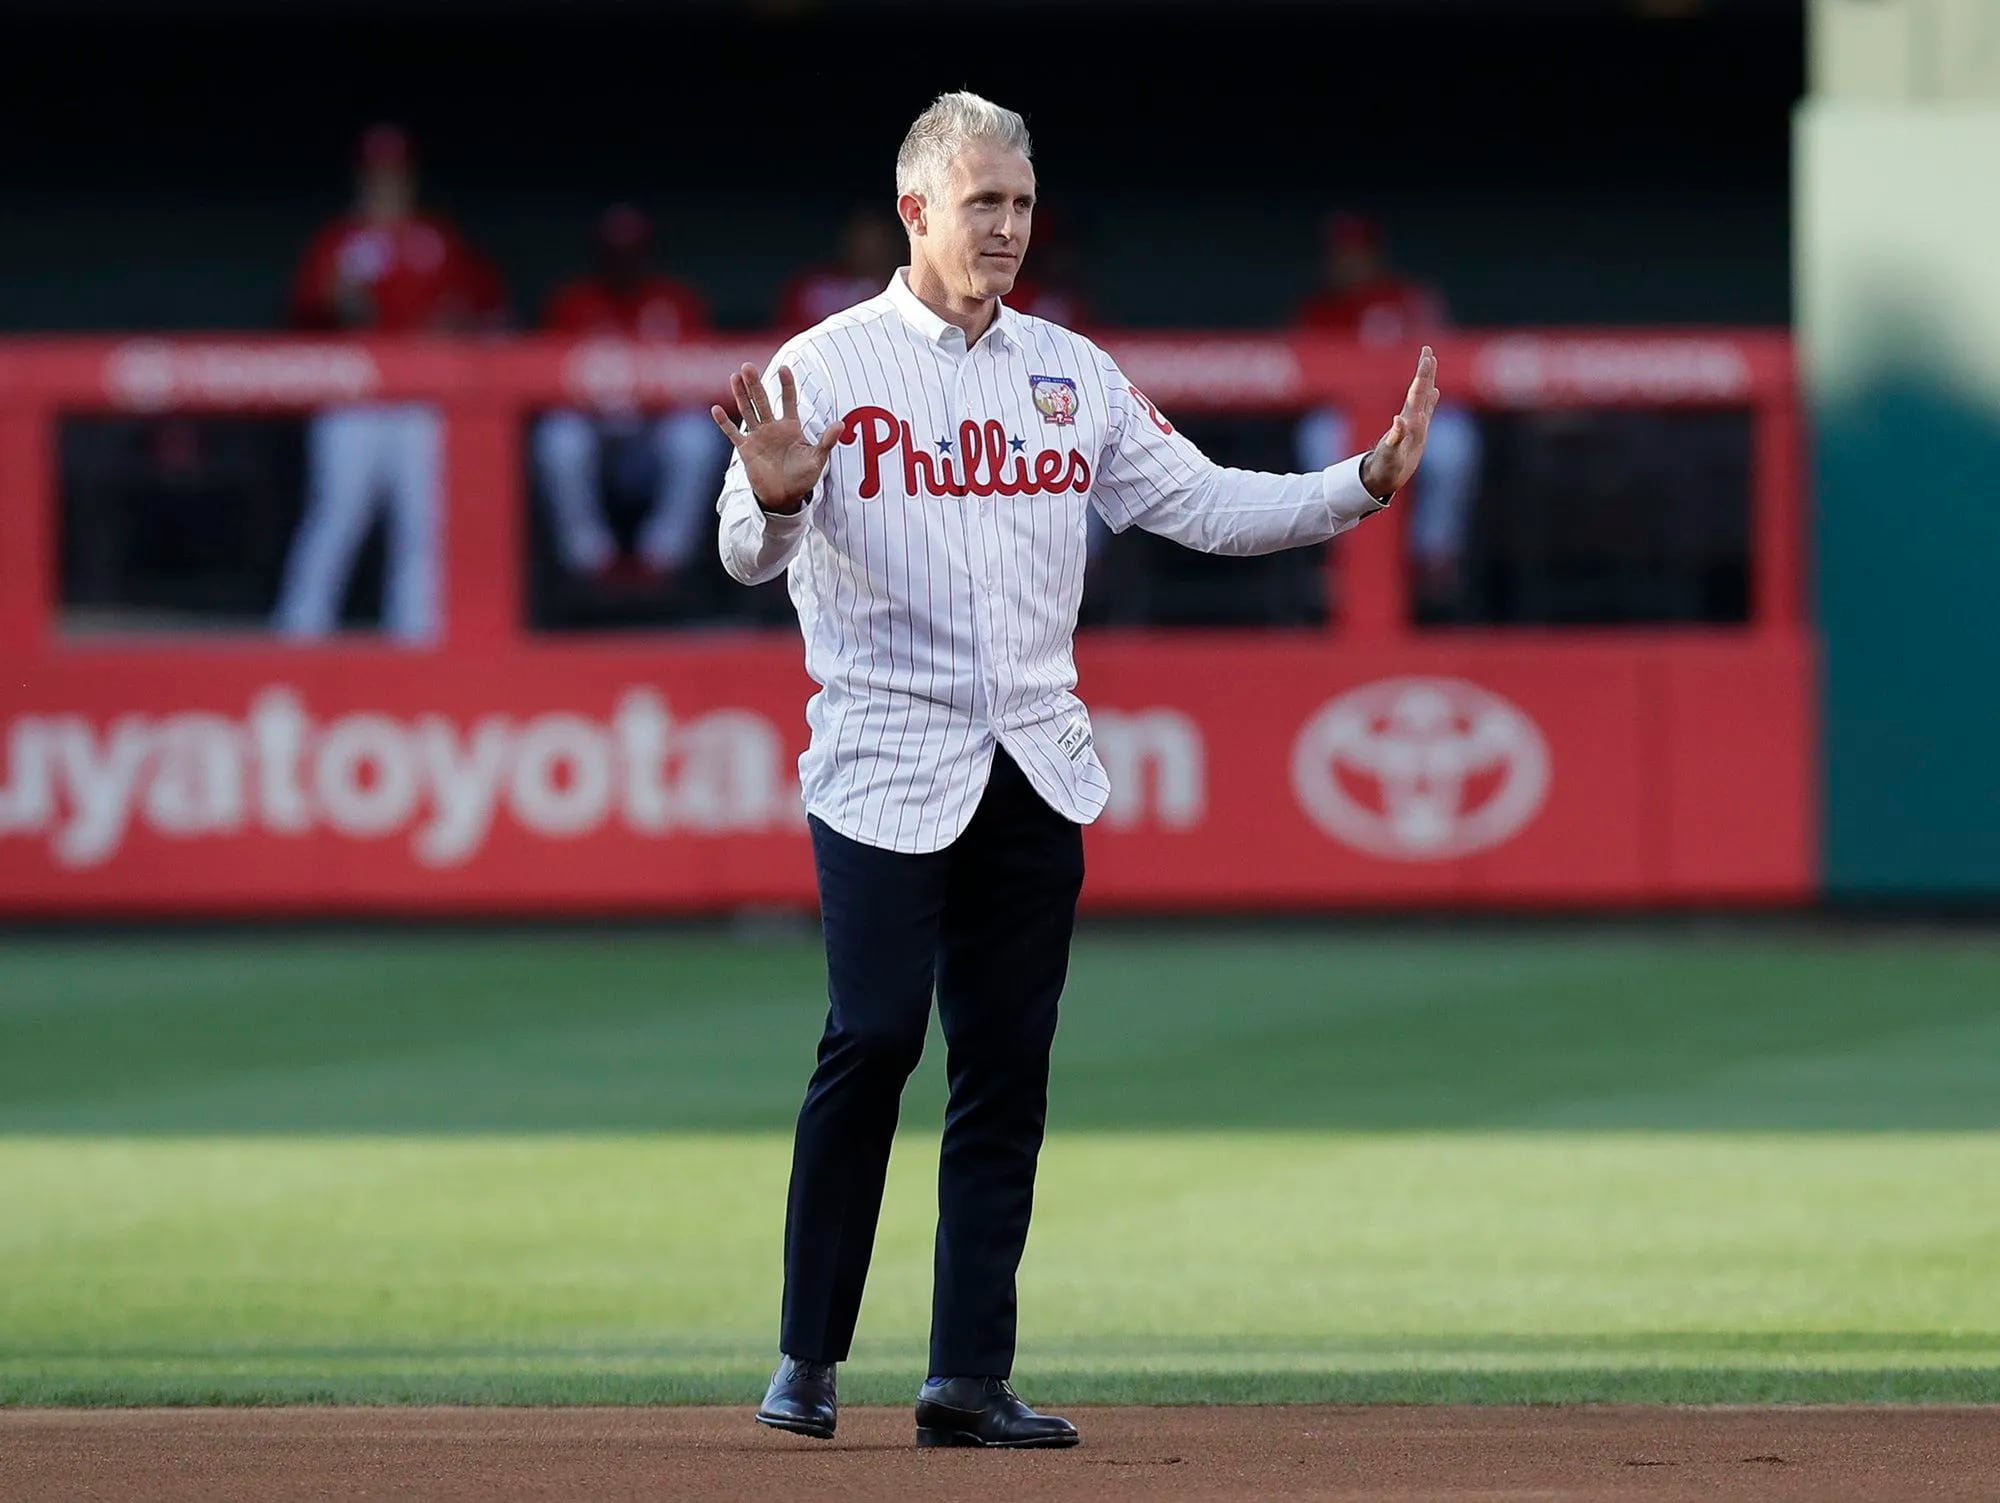 MLB Champion Chase Utley on Next Phase of His Career: 'Moving to